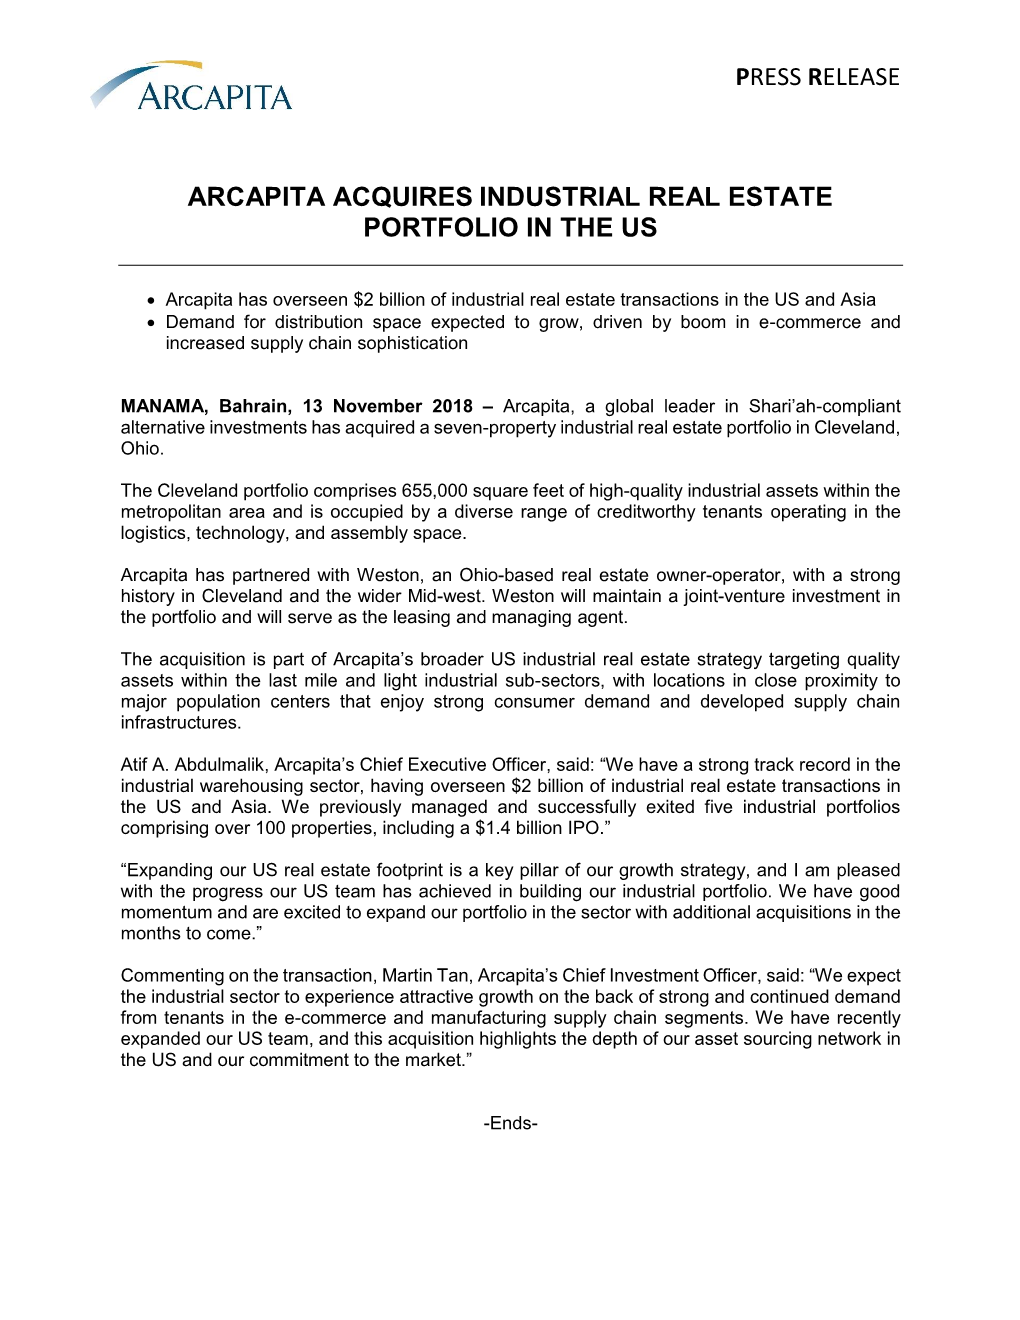 Press Release Arcapita Acquires Industrial Real